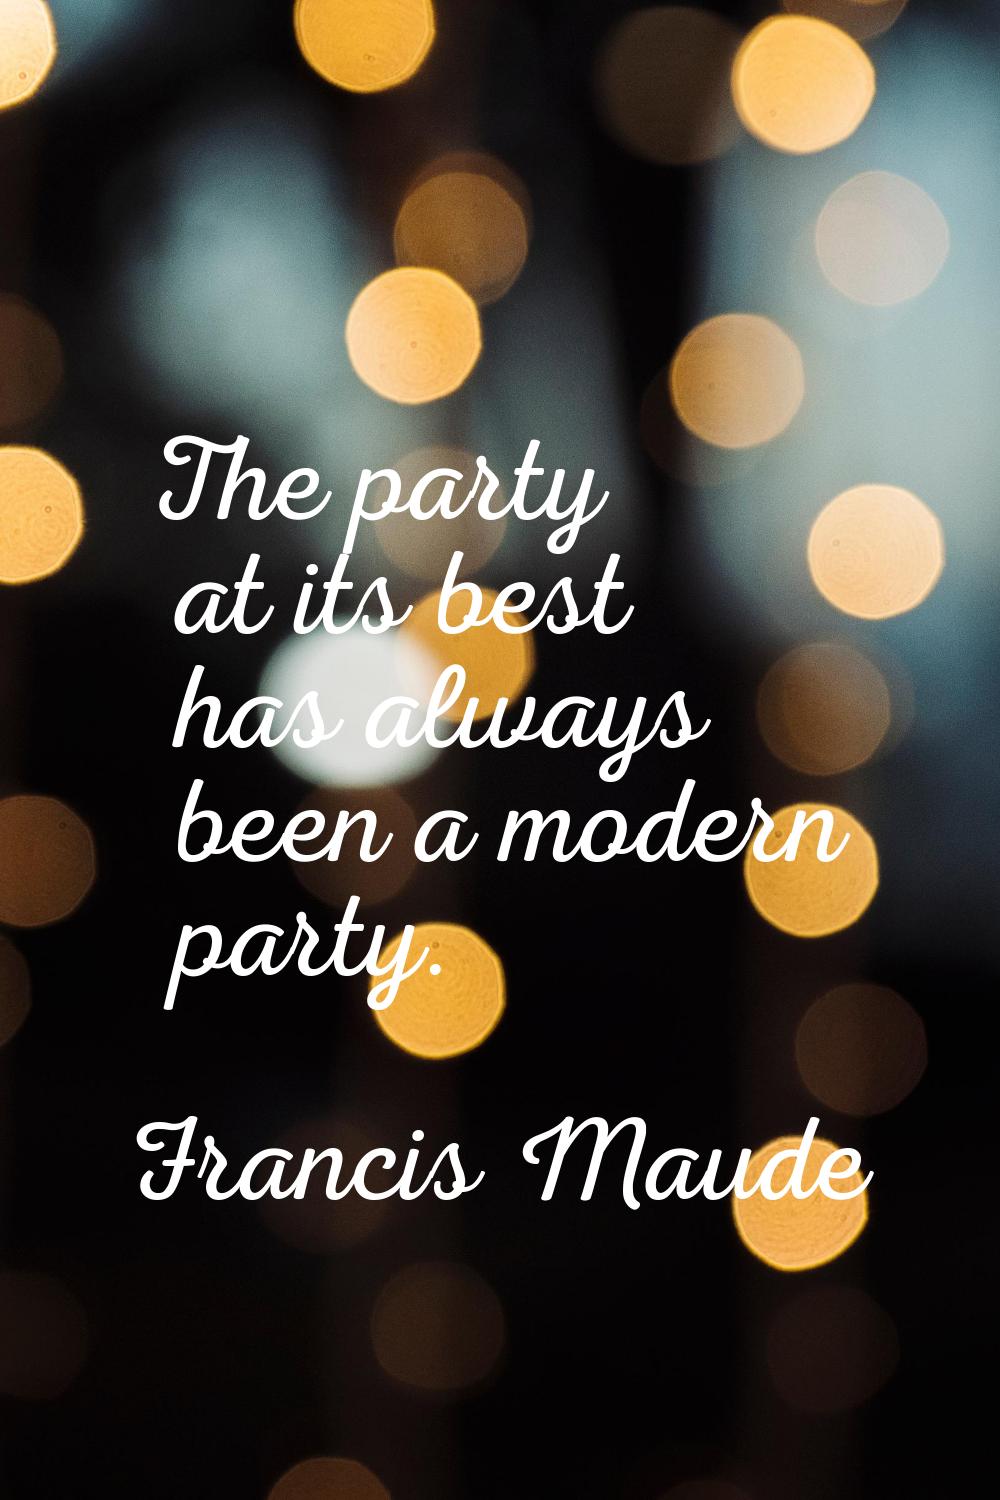 The party at its best has always been a modern party.